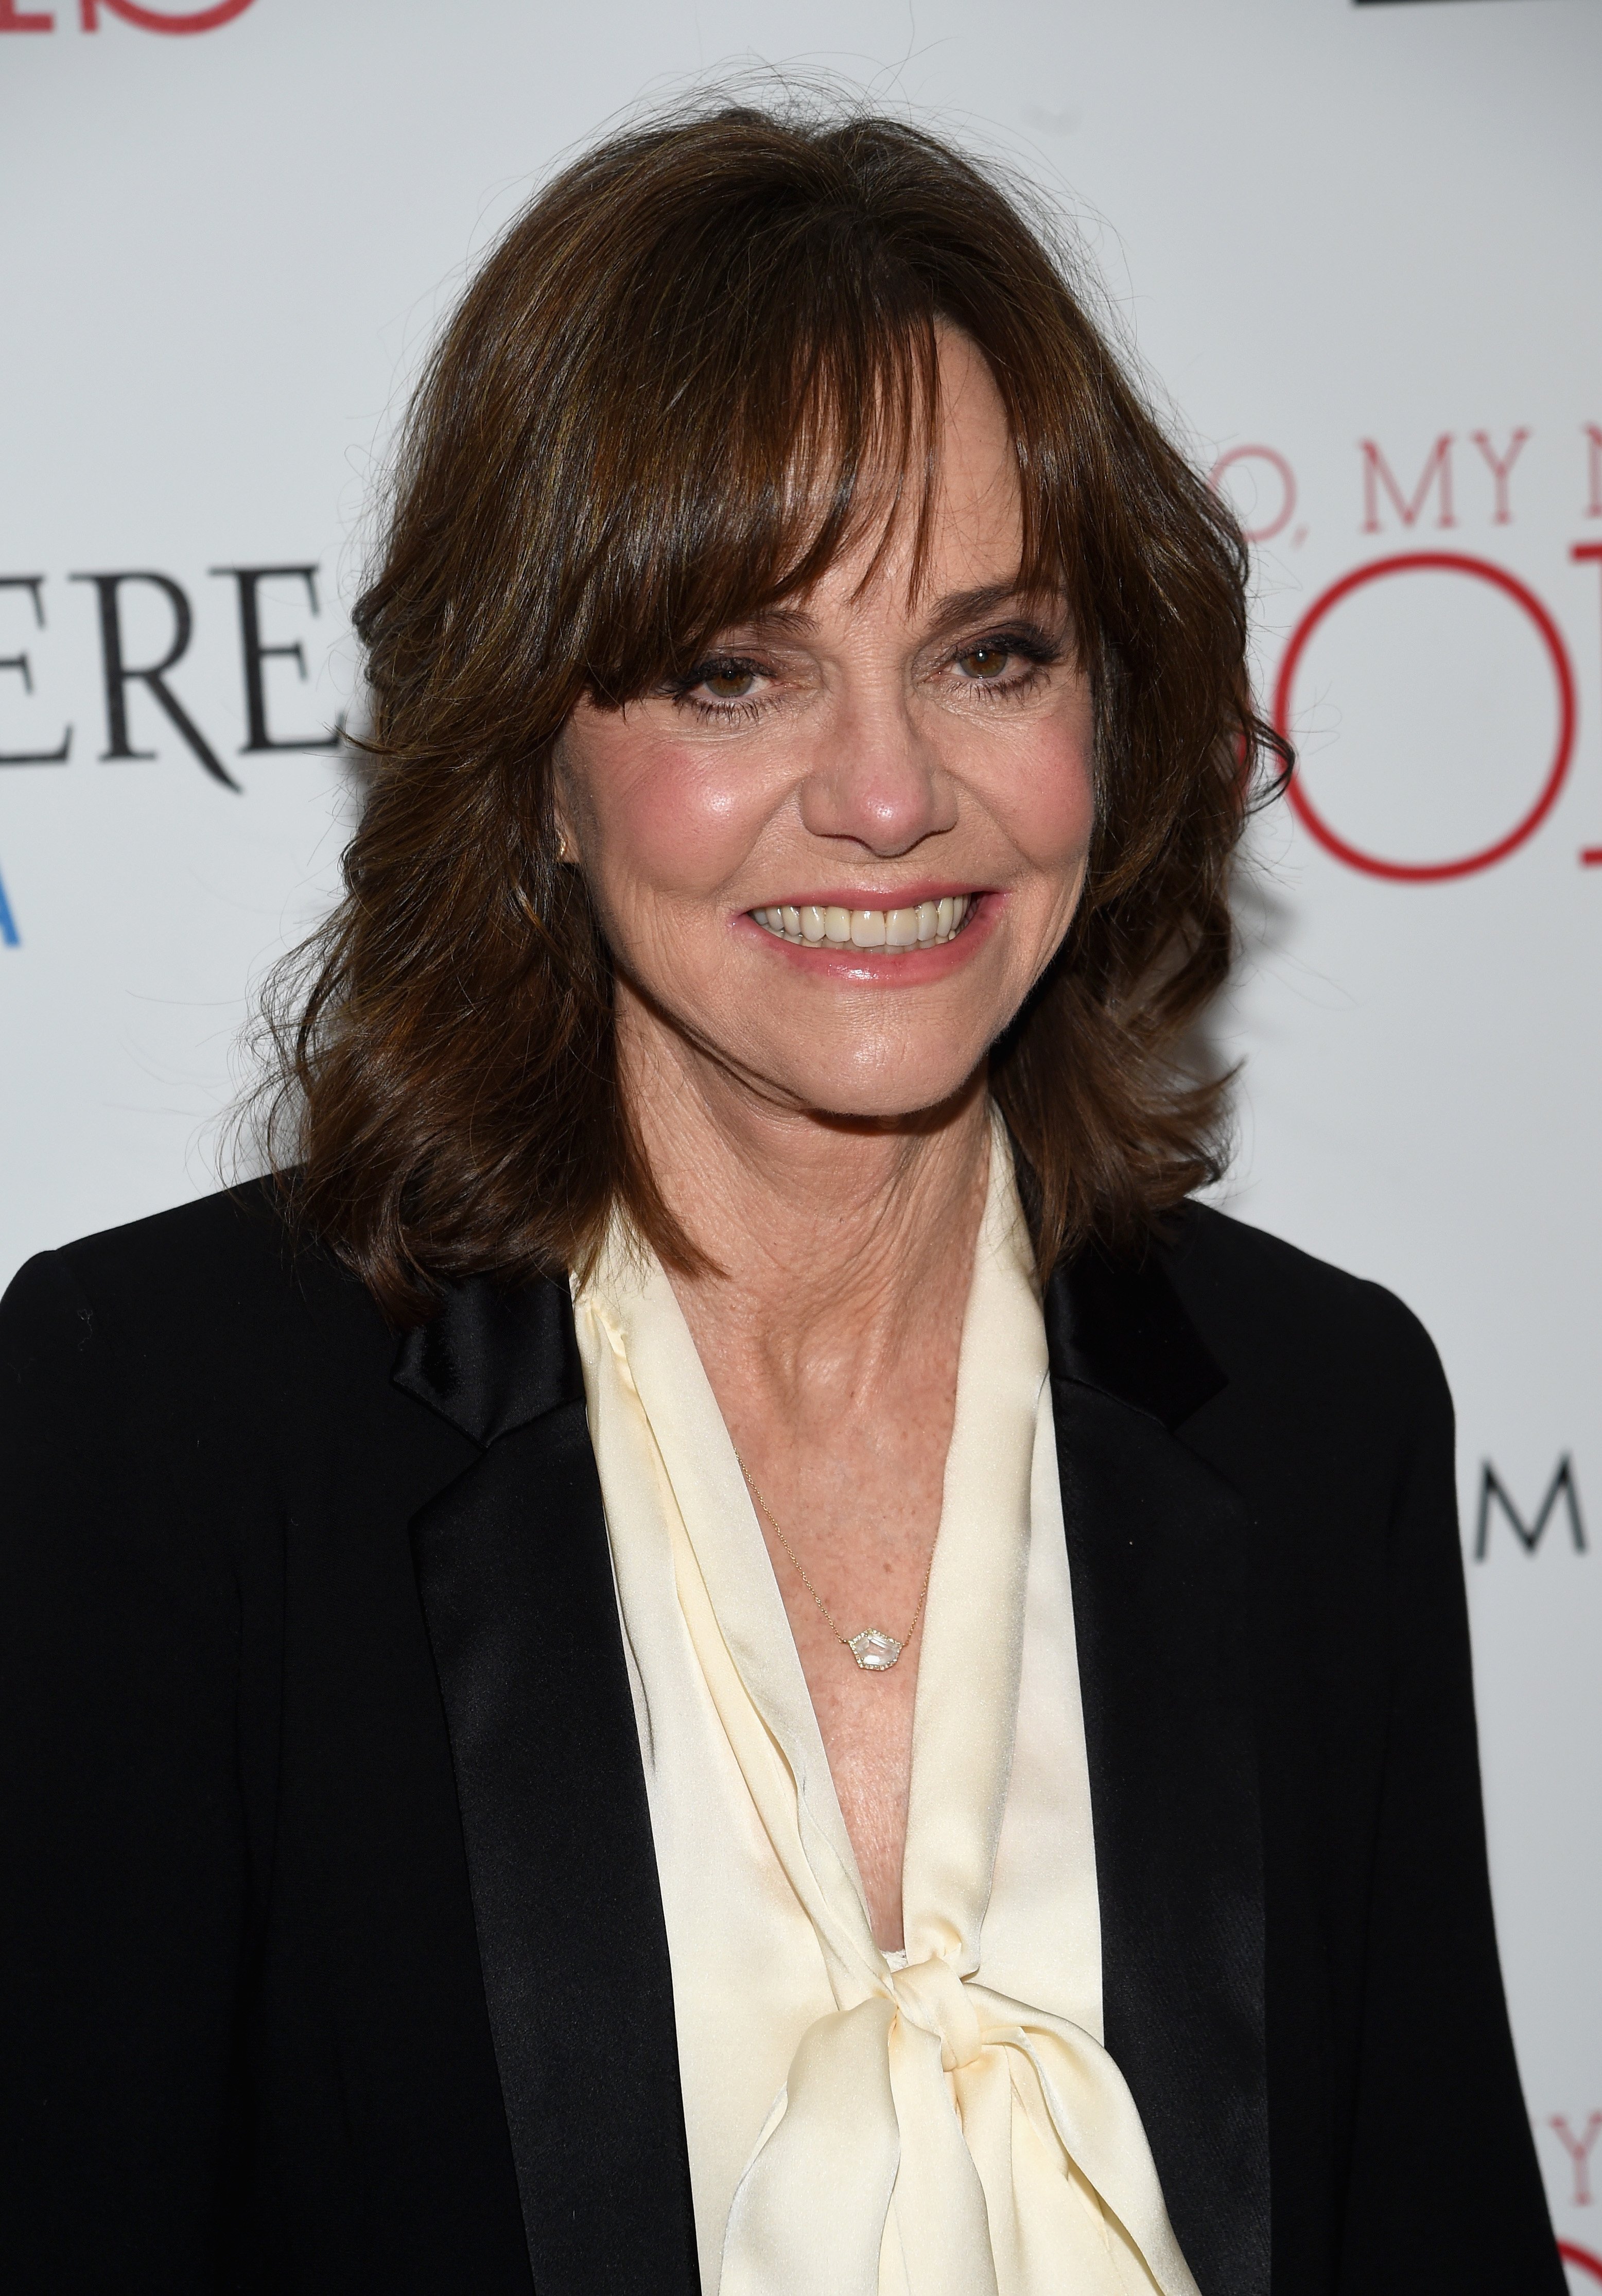 Actress Sally Field at the New York premiere of "Hello, My Name Is Doris" in New York. | Source: Getty Images